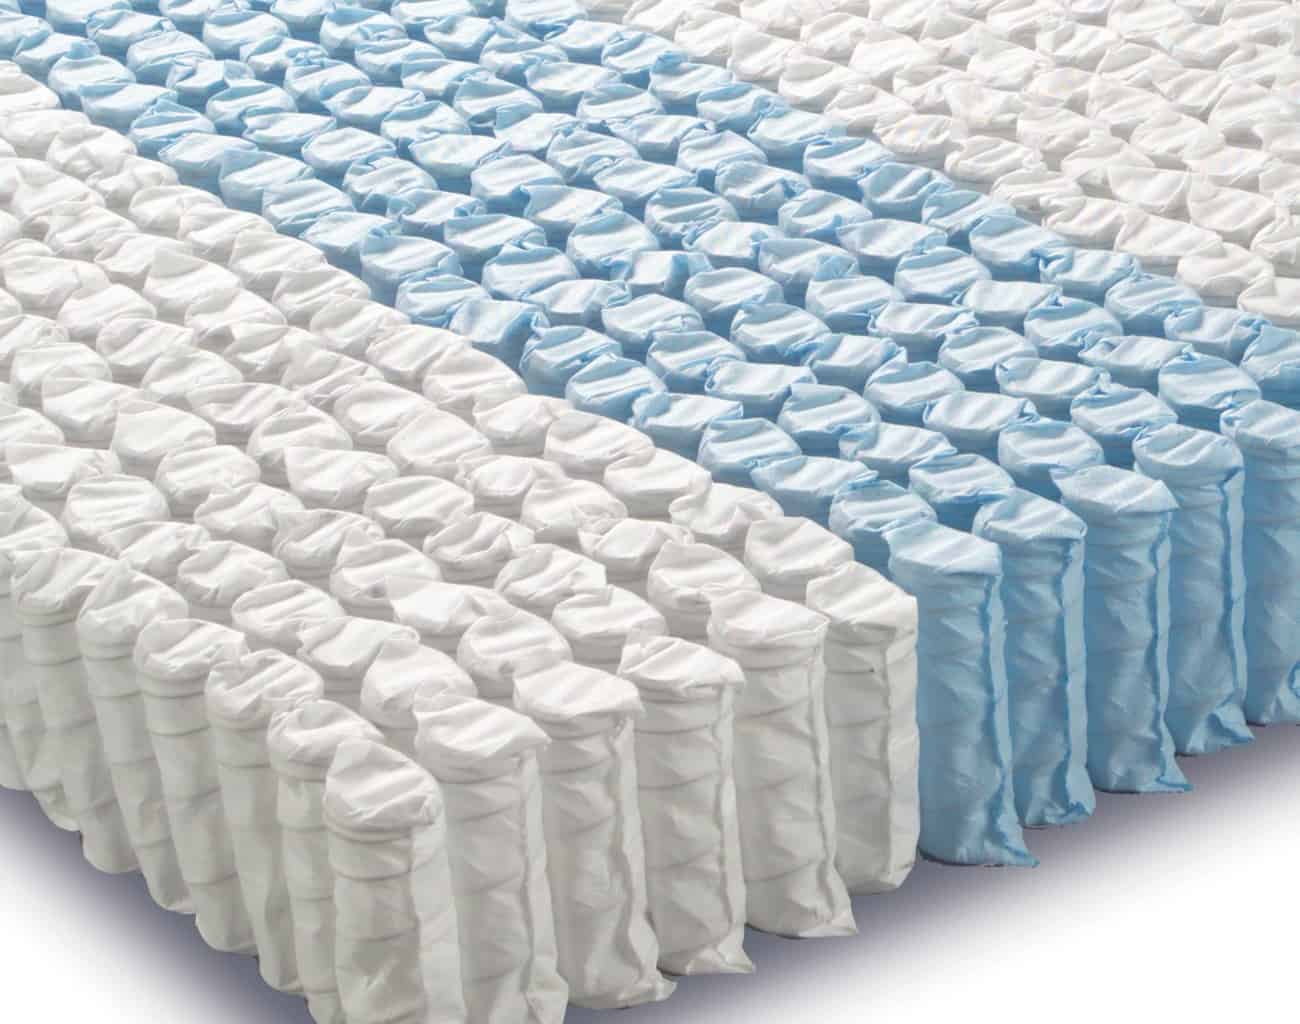 Common Mistakes We Make When Buying a Mattress